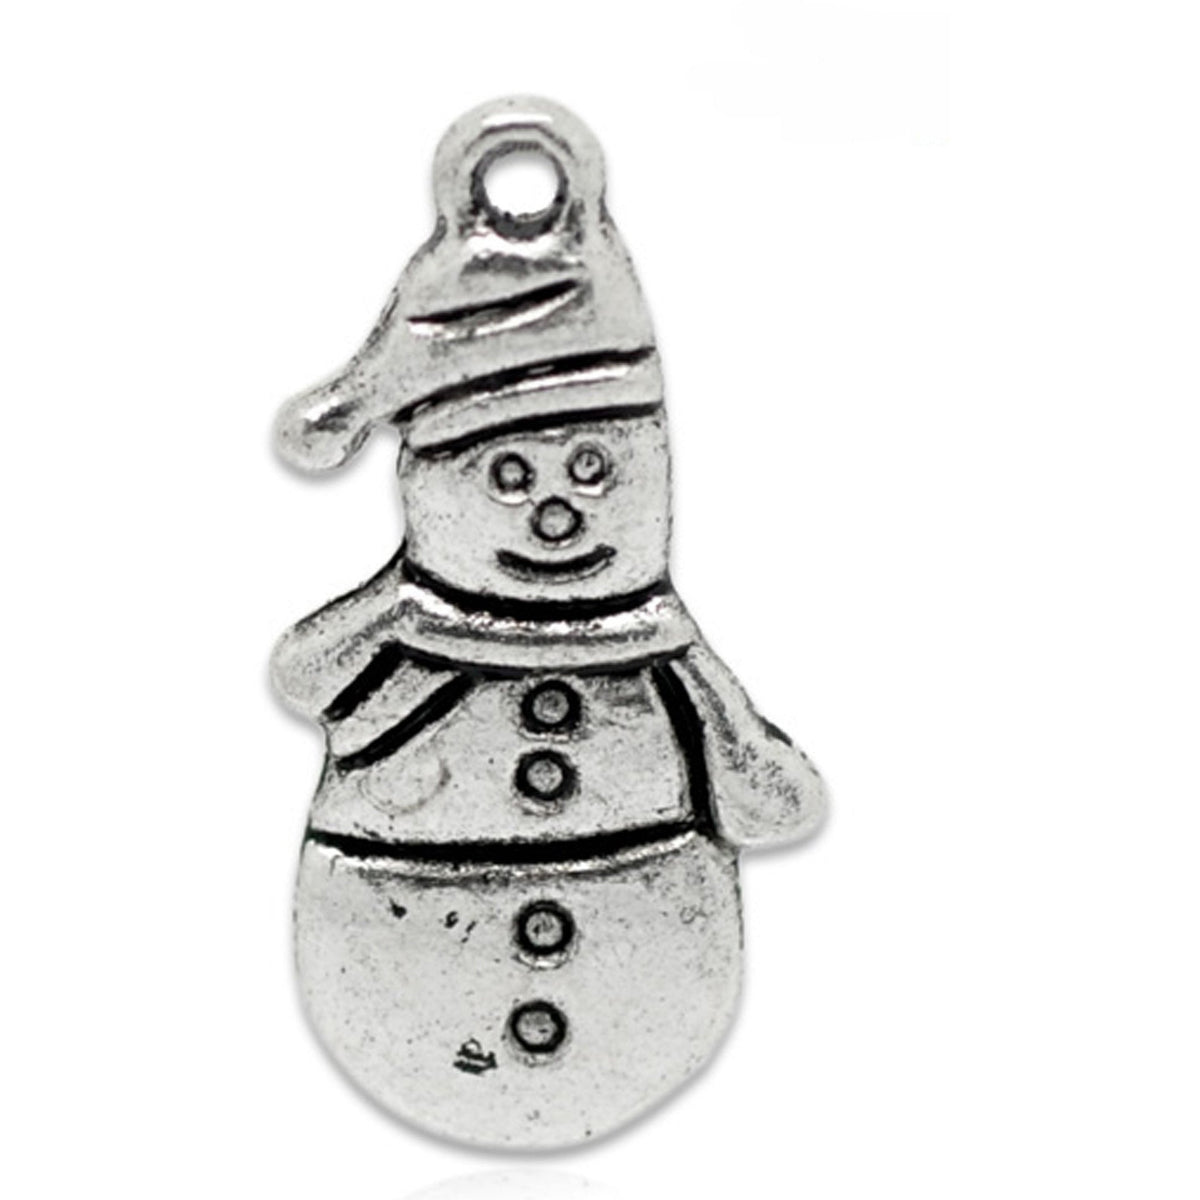 Christmas Charm Collection Antique Silver Tone 25 Different Charms - COL114